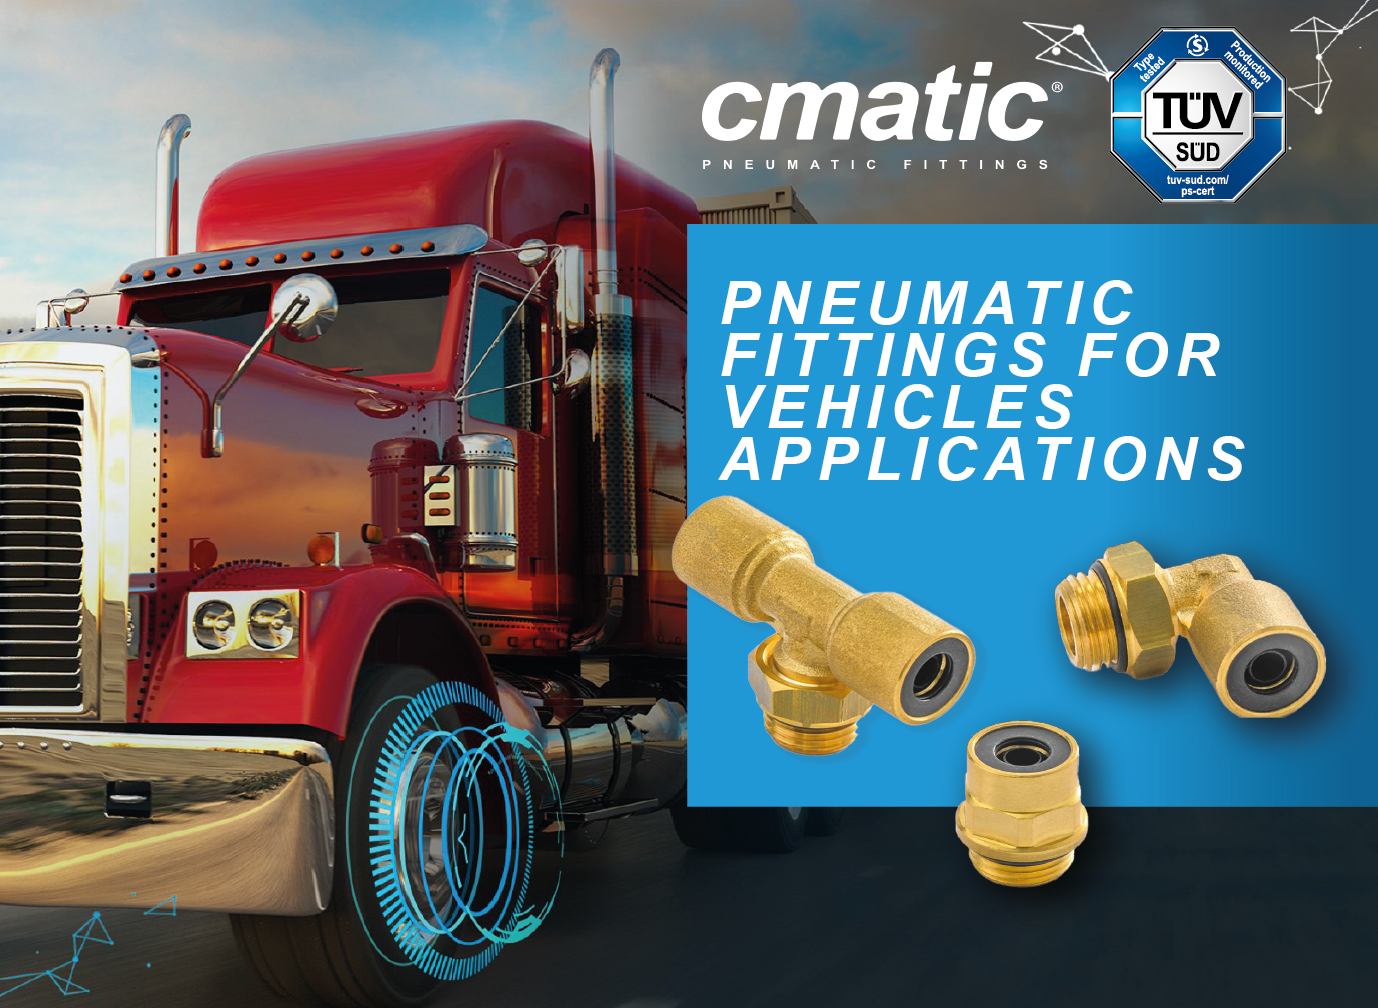 Air Braking Systems and pneumatic systems for heavy duty vehicles